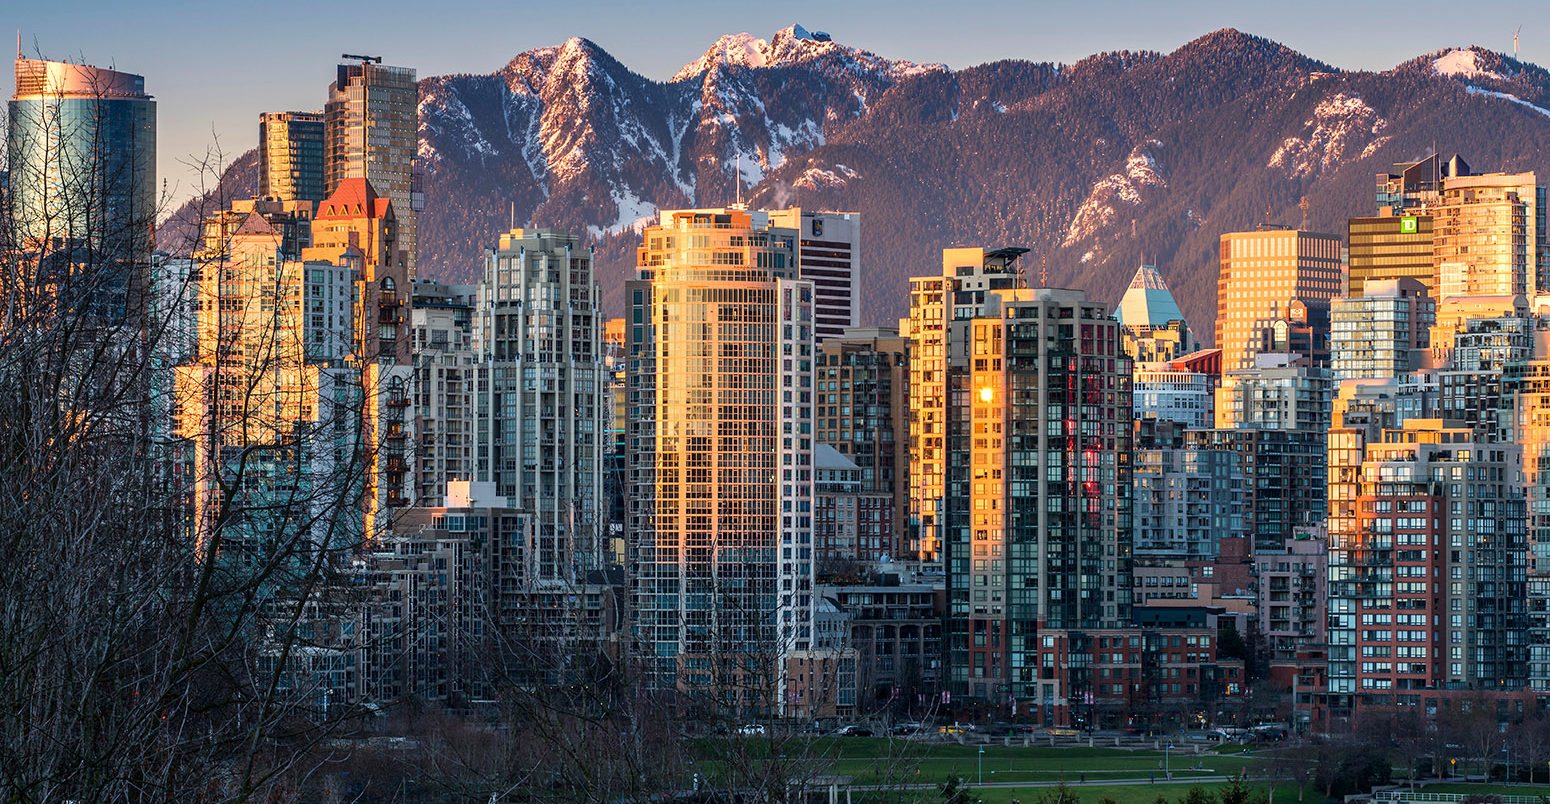 Downtown skyline with snowy mountains behind at sunset, Vancouver, British Columbia, Canada. Credit: Stefano Politi Markovina / Alamy Stock Photo. FBDEJ1